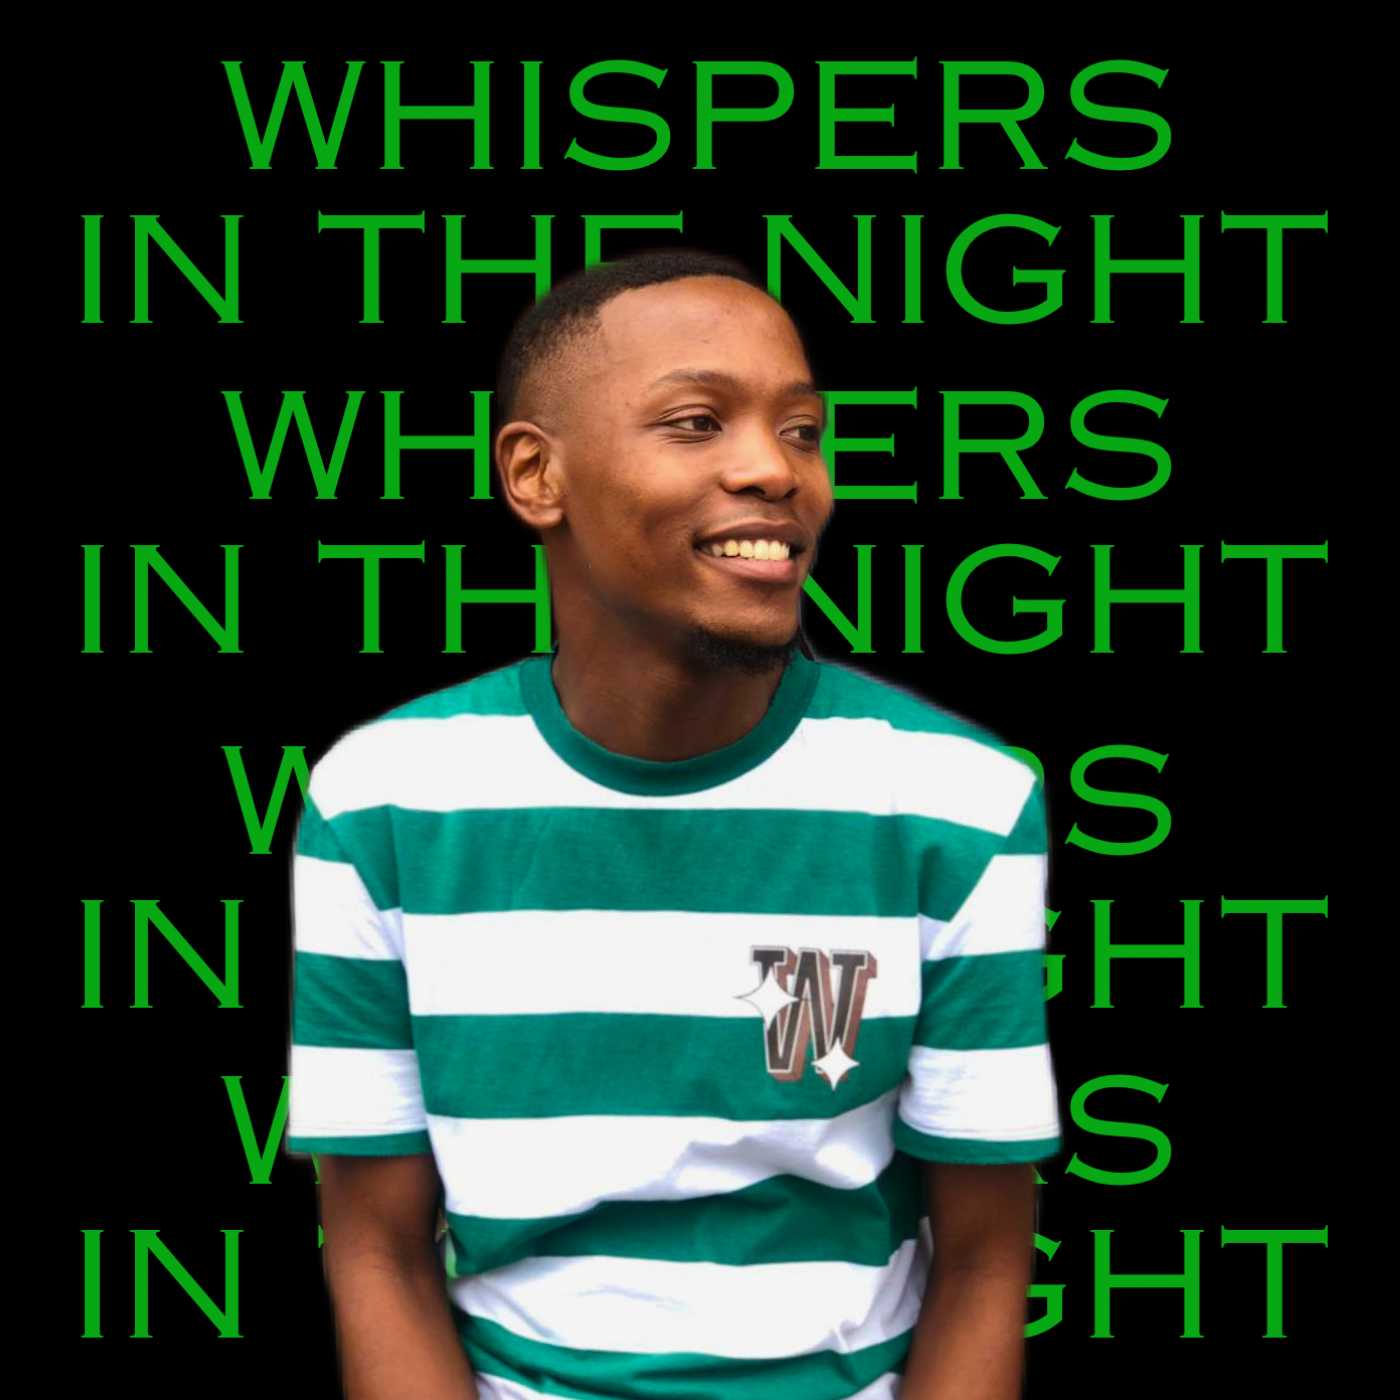 Whispers in the Night - Anele_SA